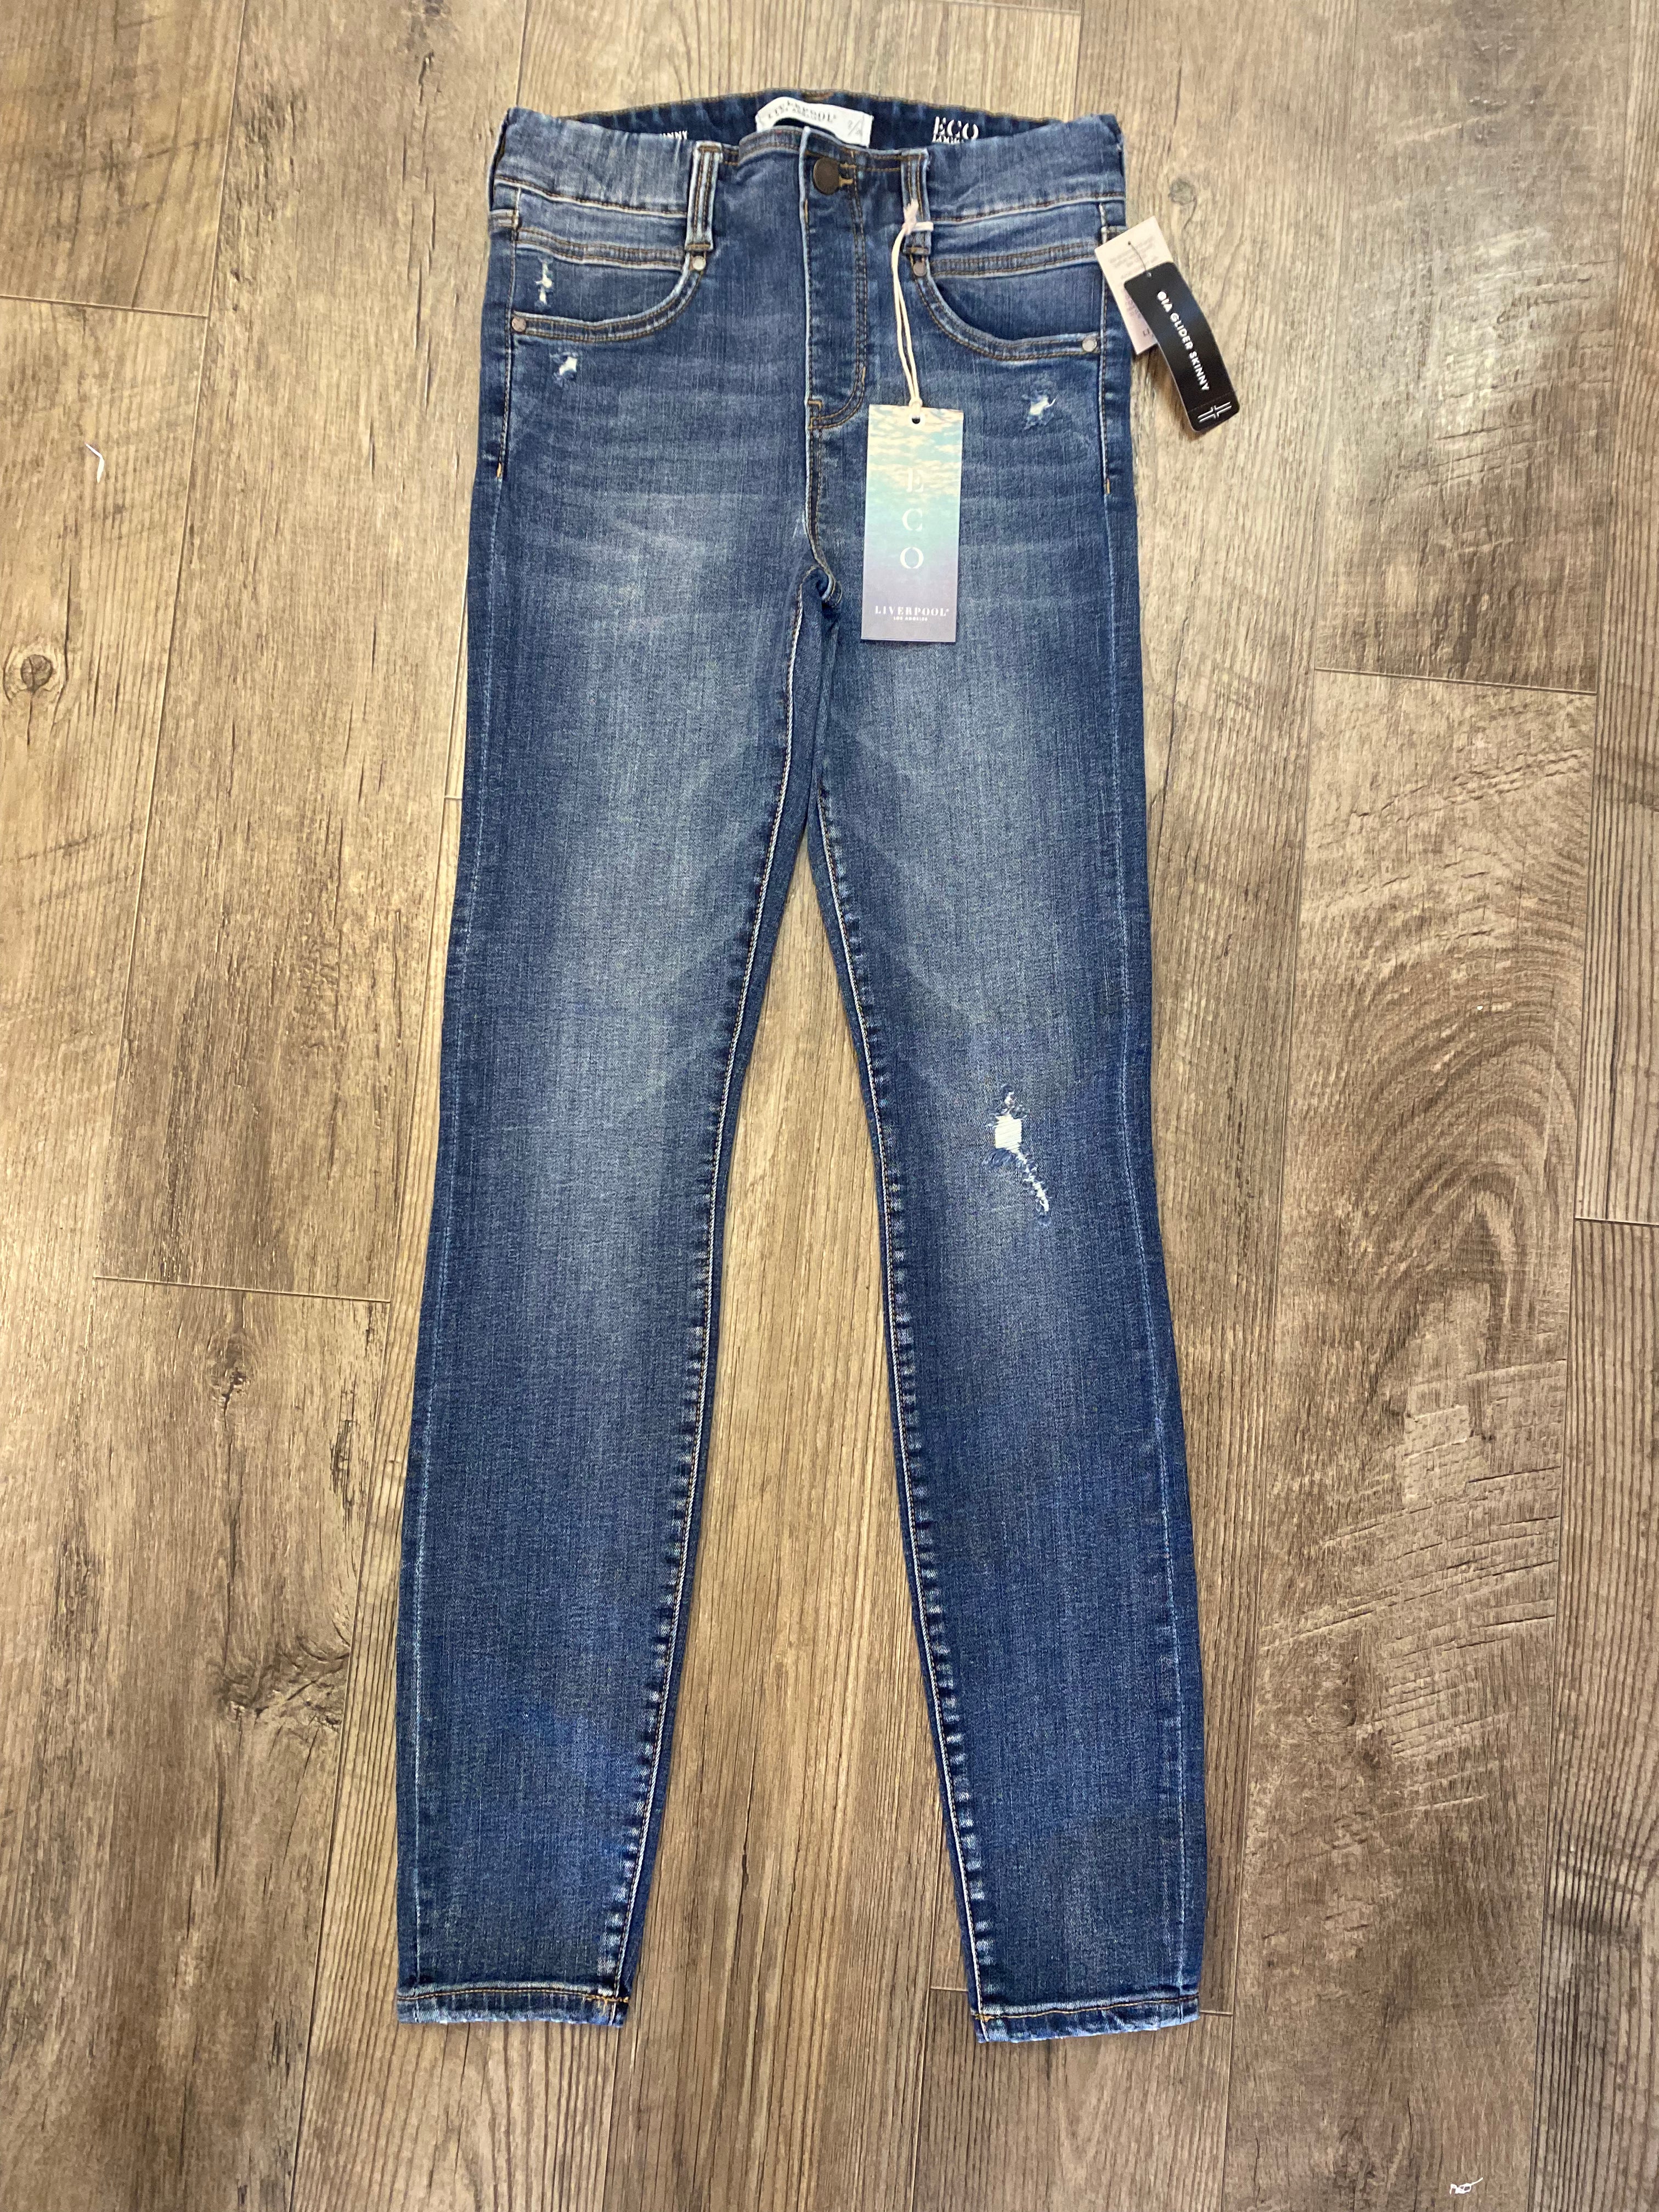 LiverPool Jeans Gia Glider Skinny in the Colour Westler